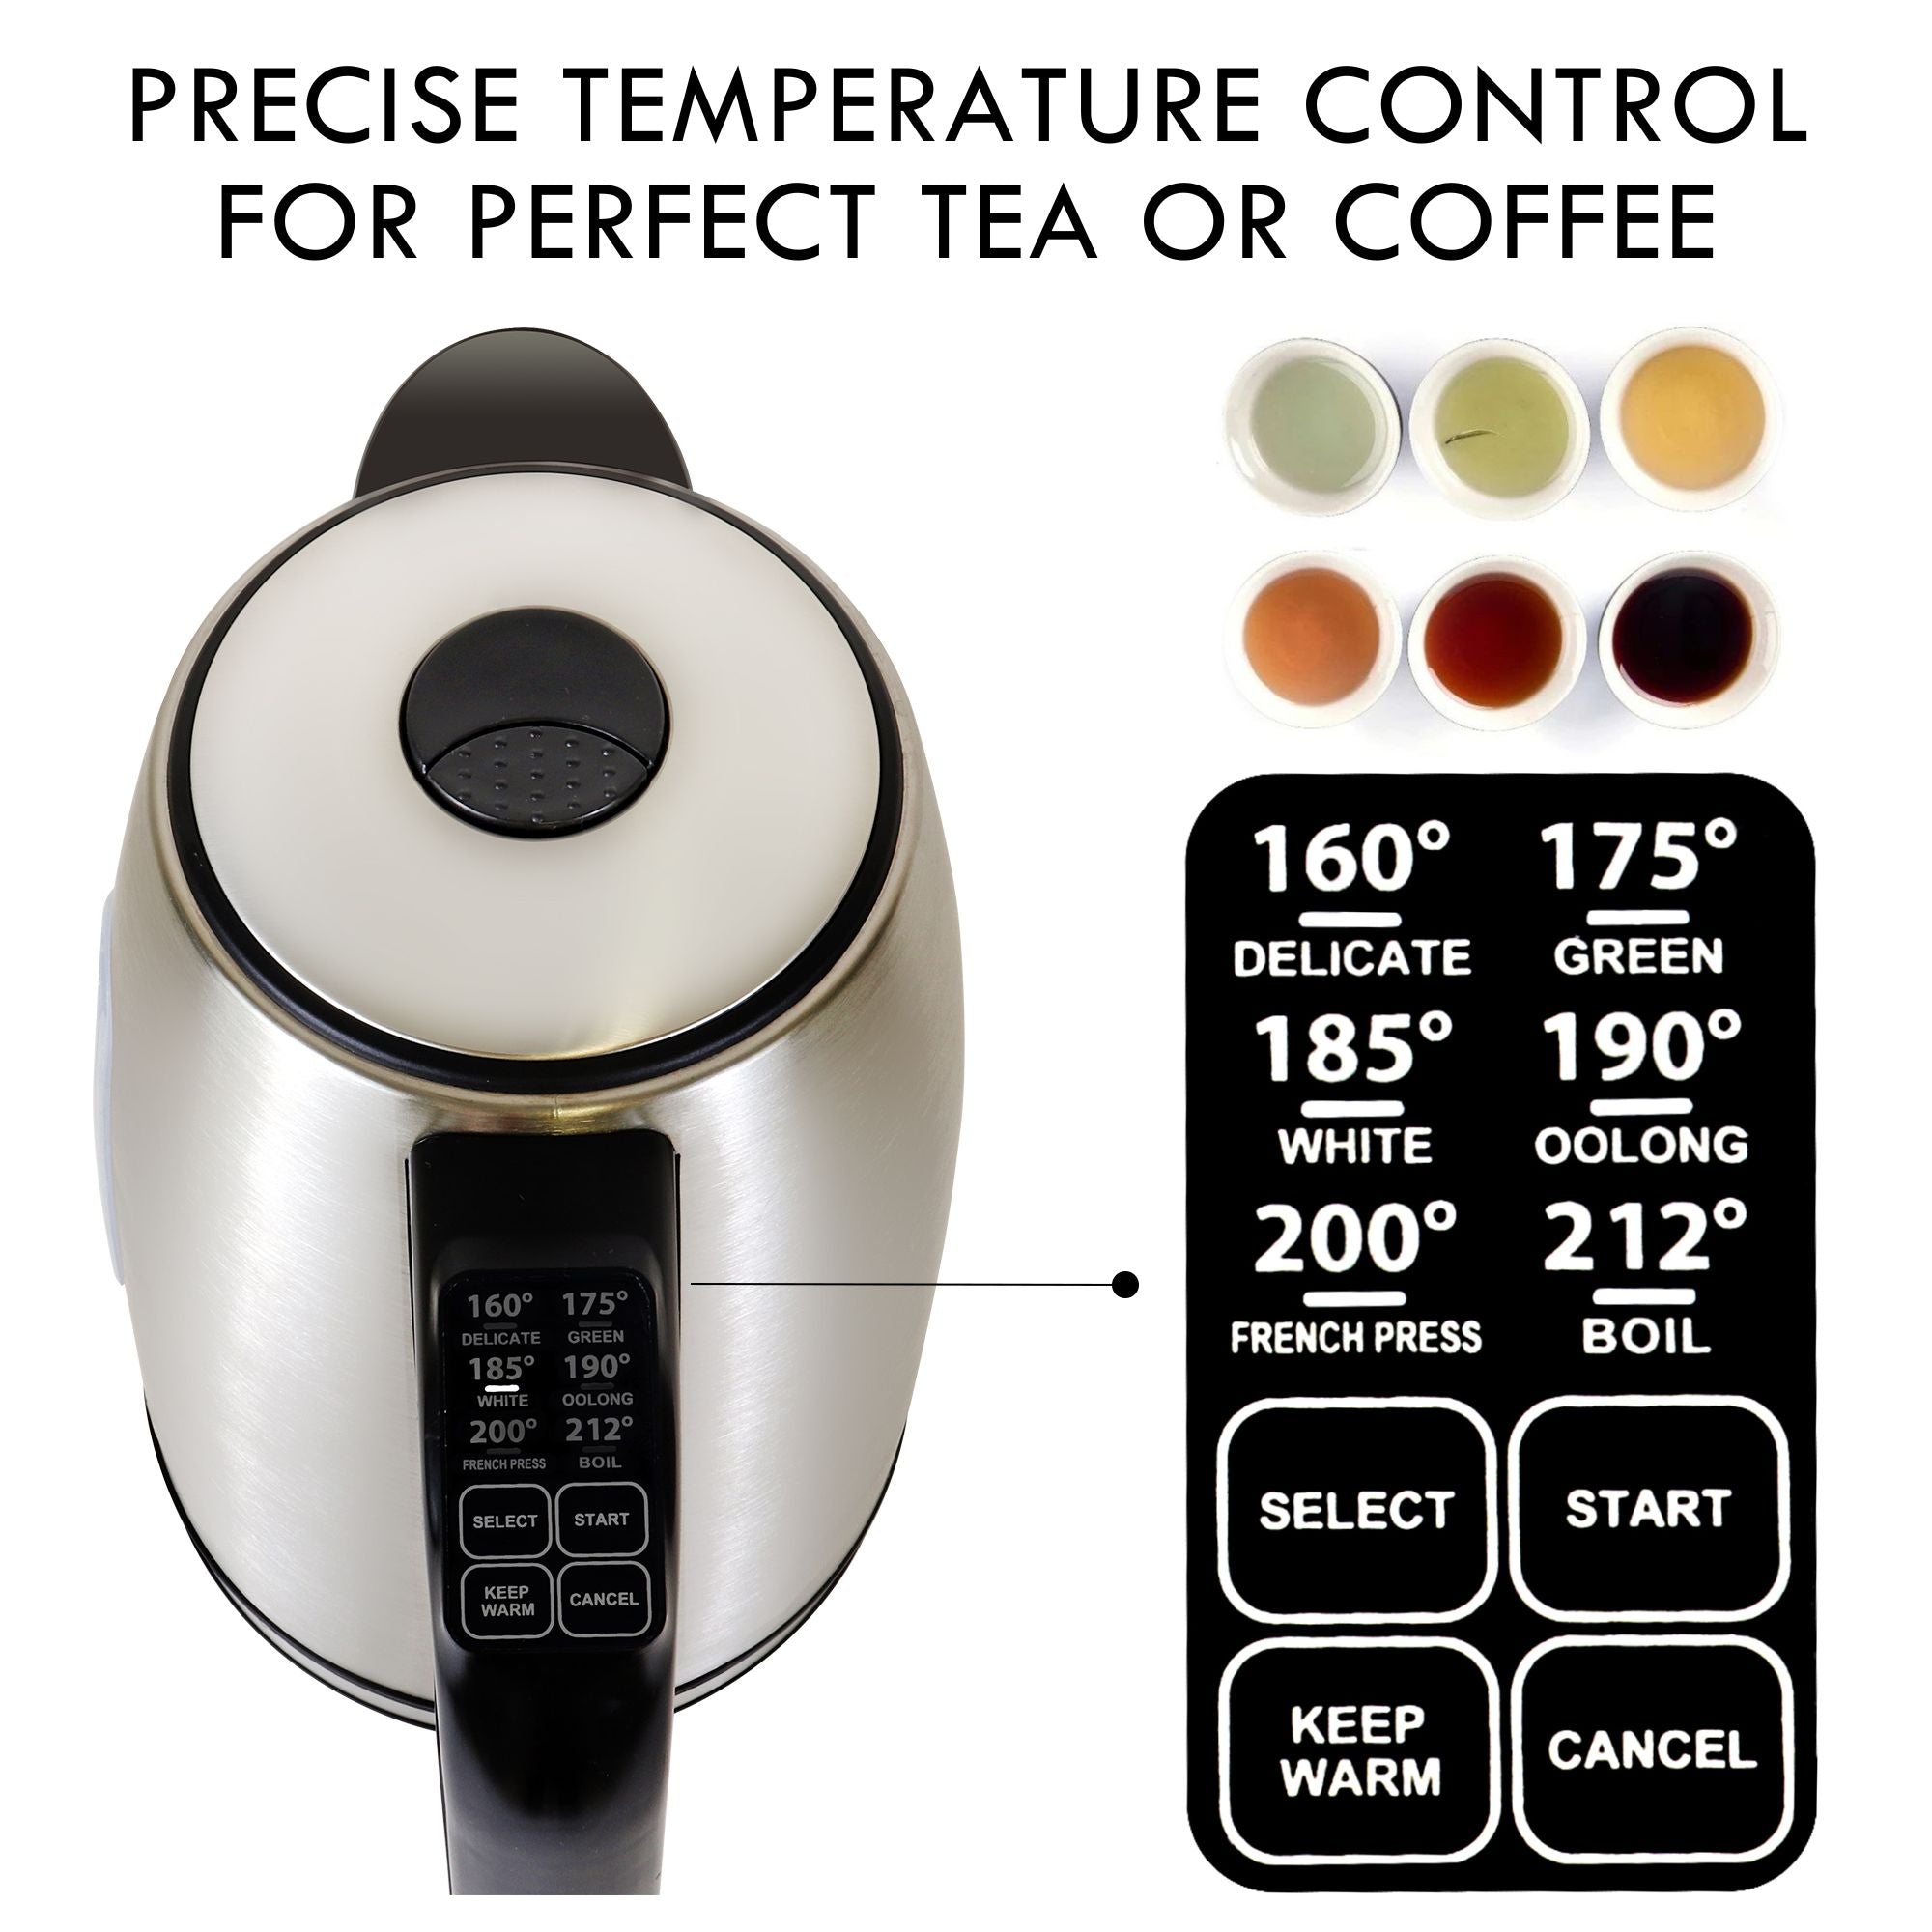 Kenmore cordless electric kettle on a white background on the left with 6 cups of different types of tea above a closeup image of the digital controls and pre-set temperatures on the right. Text above reads, "Precise temperature control for perfect tea or coffee"